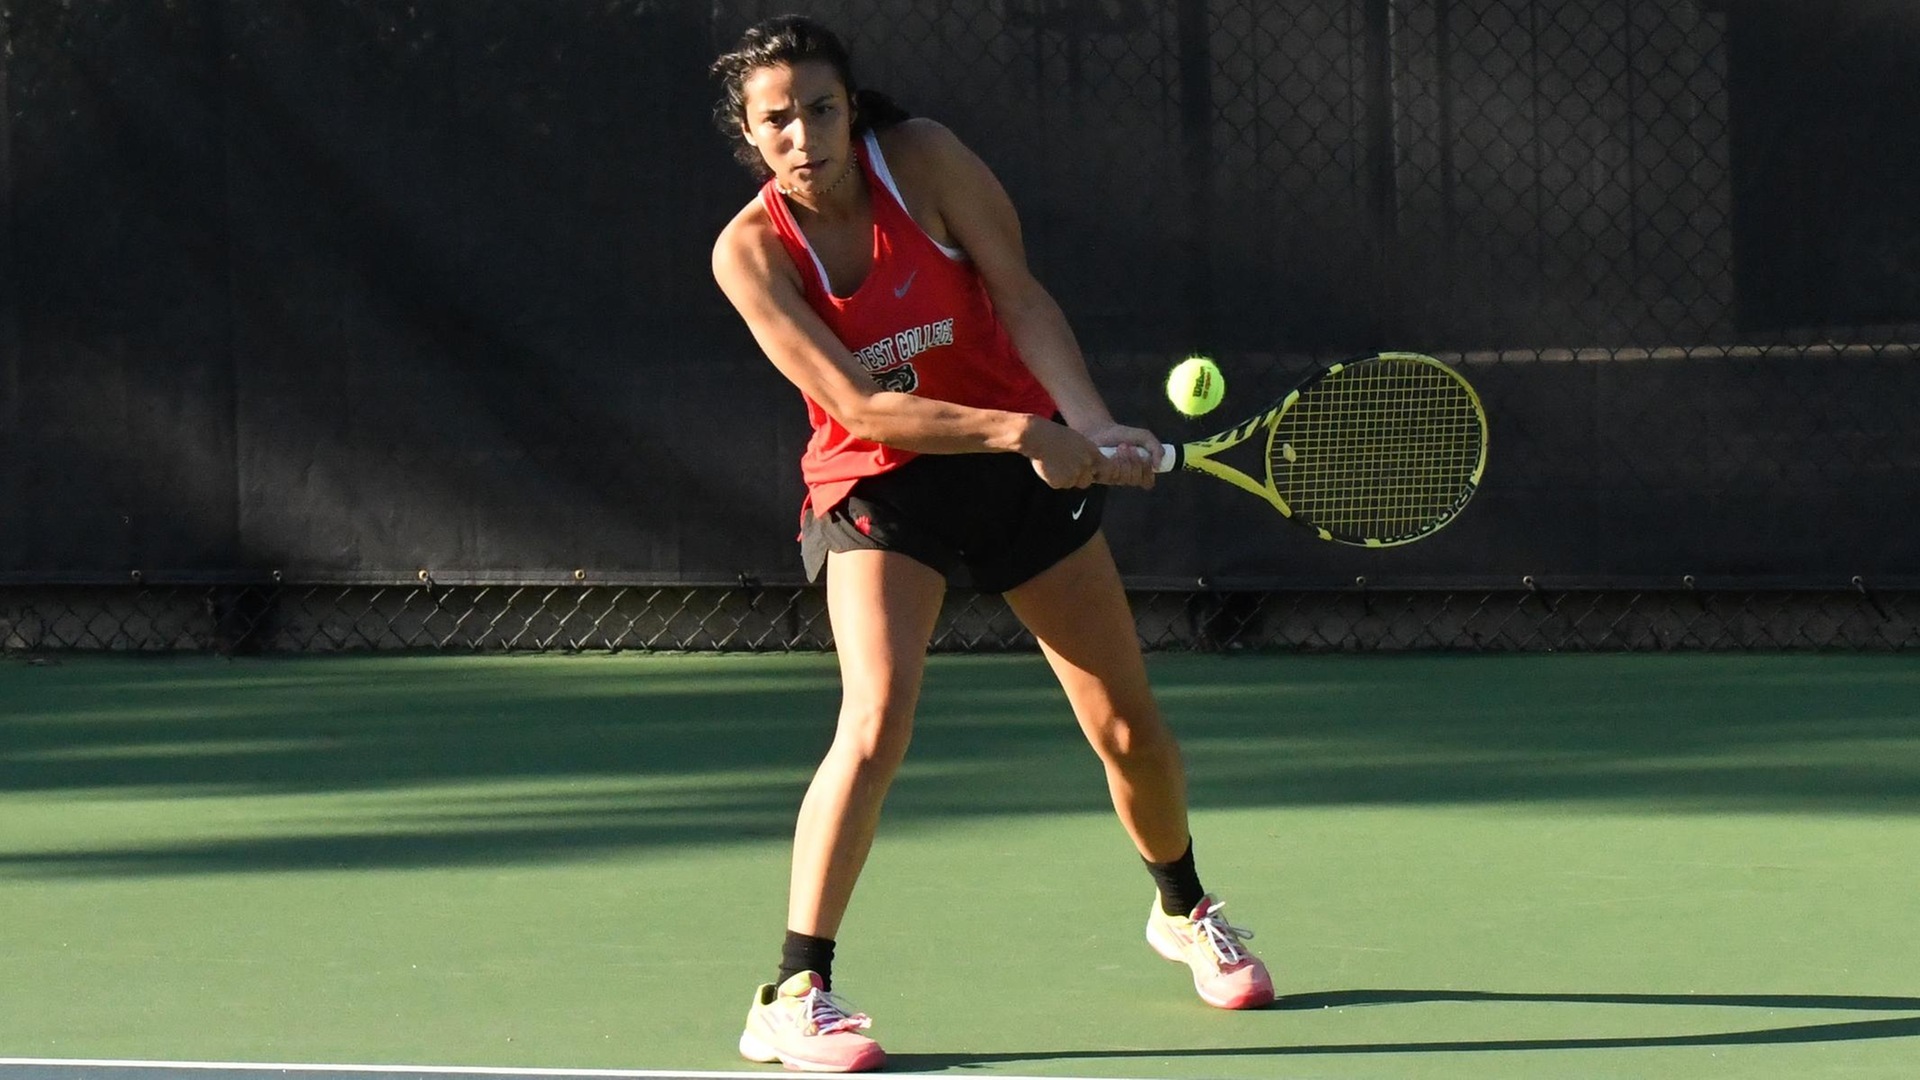 Three Foresters Reach Second Round at ITA Regional Tournament